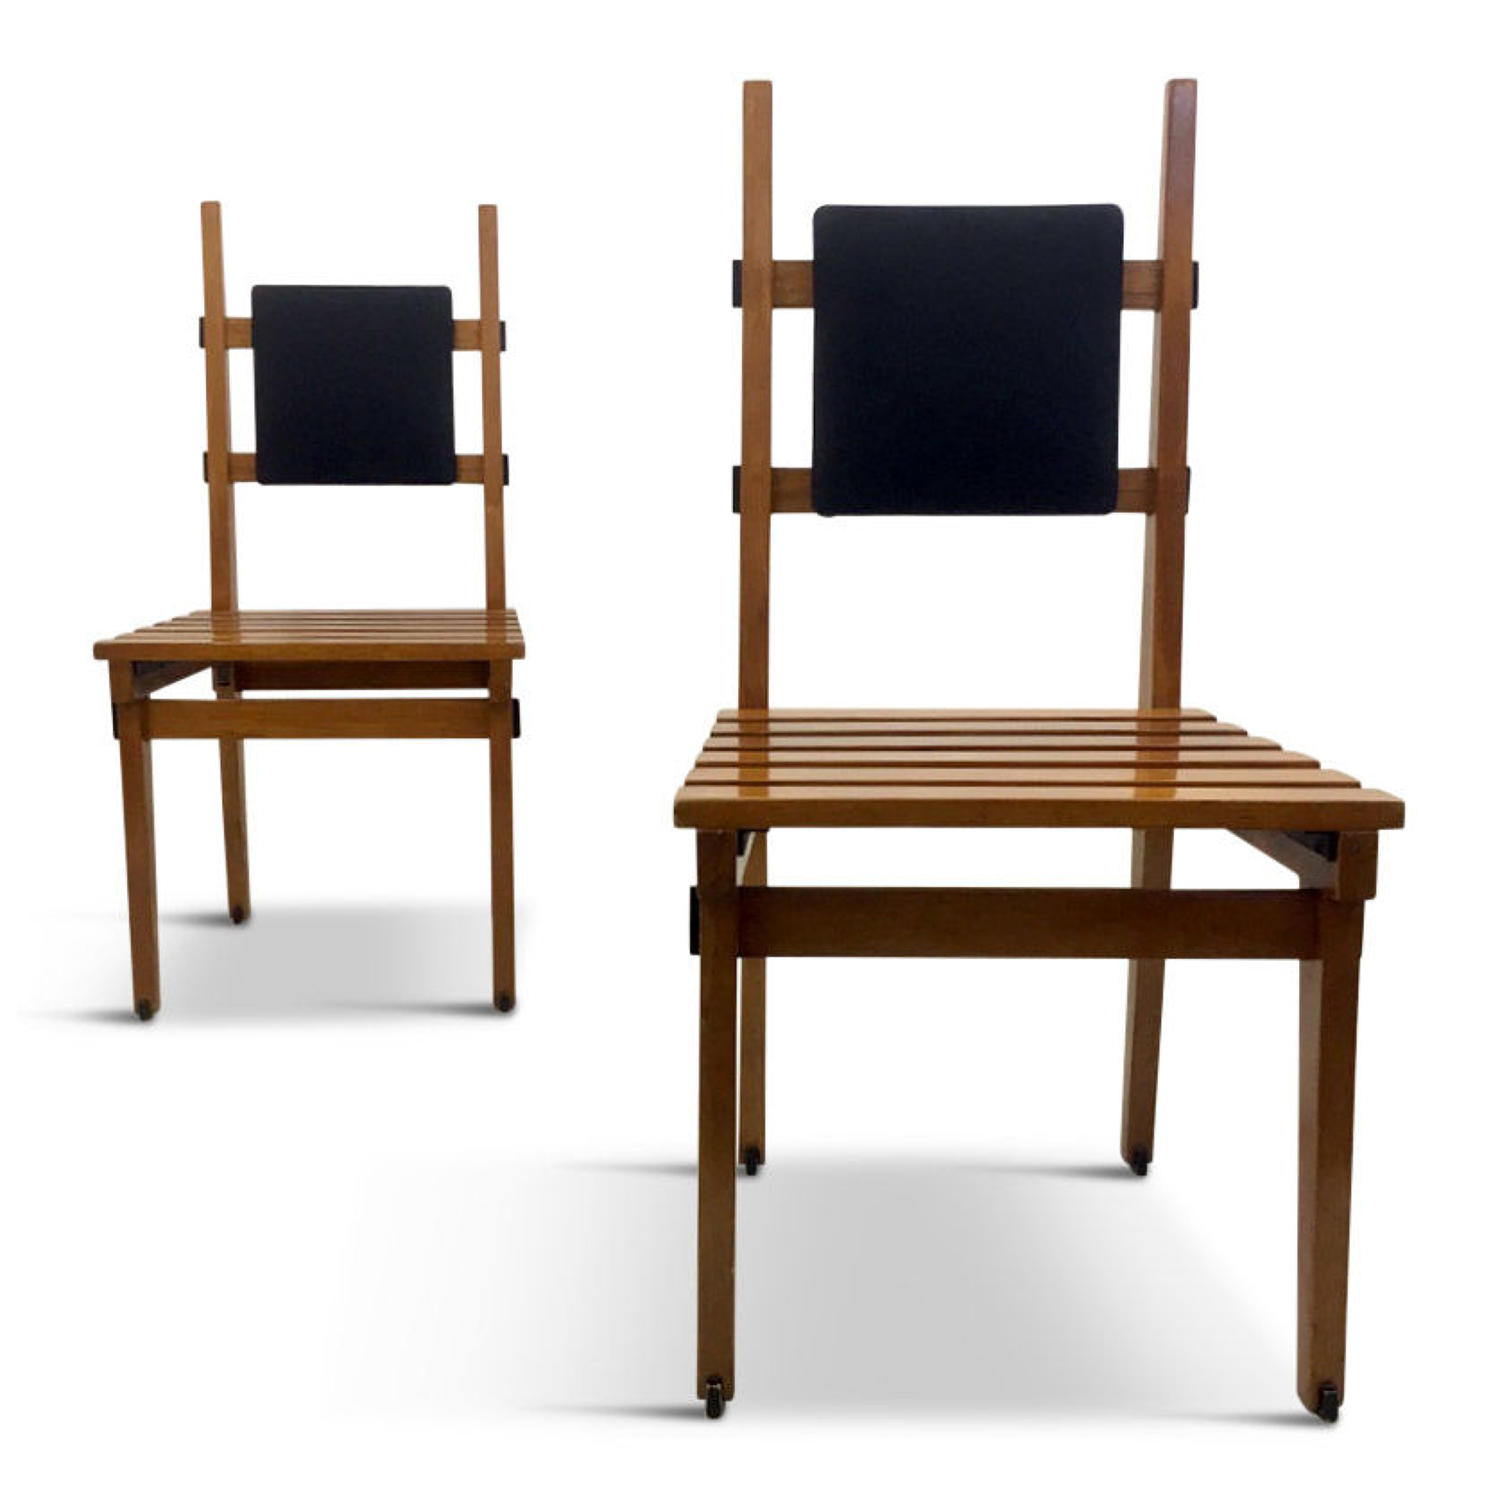 A pair of unusual Italian side chairs